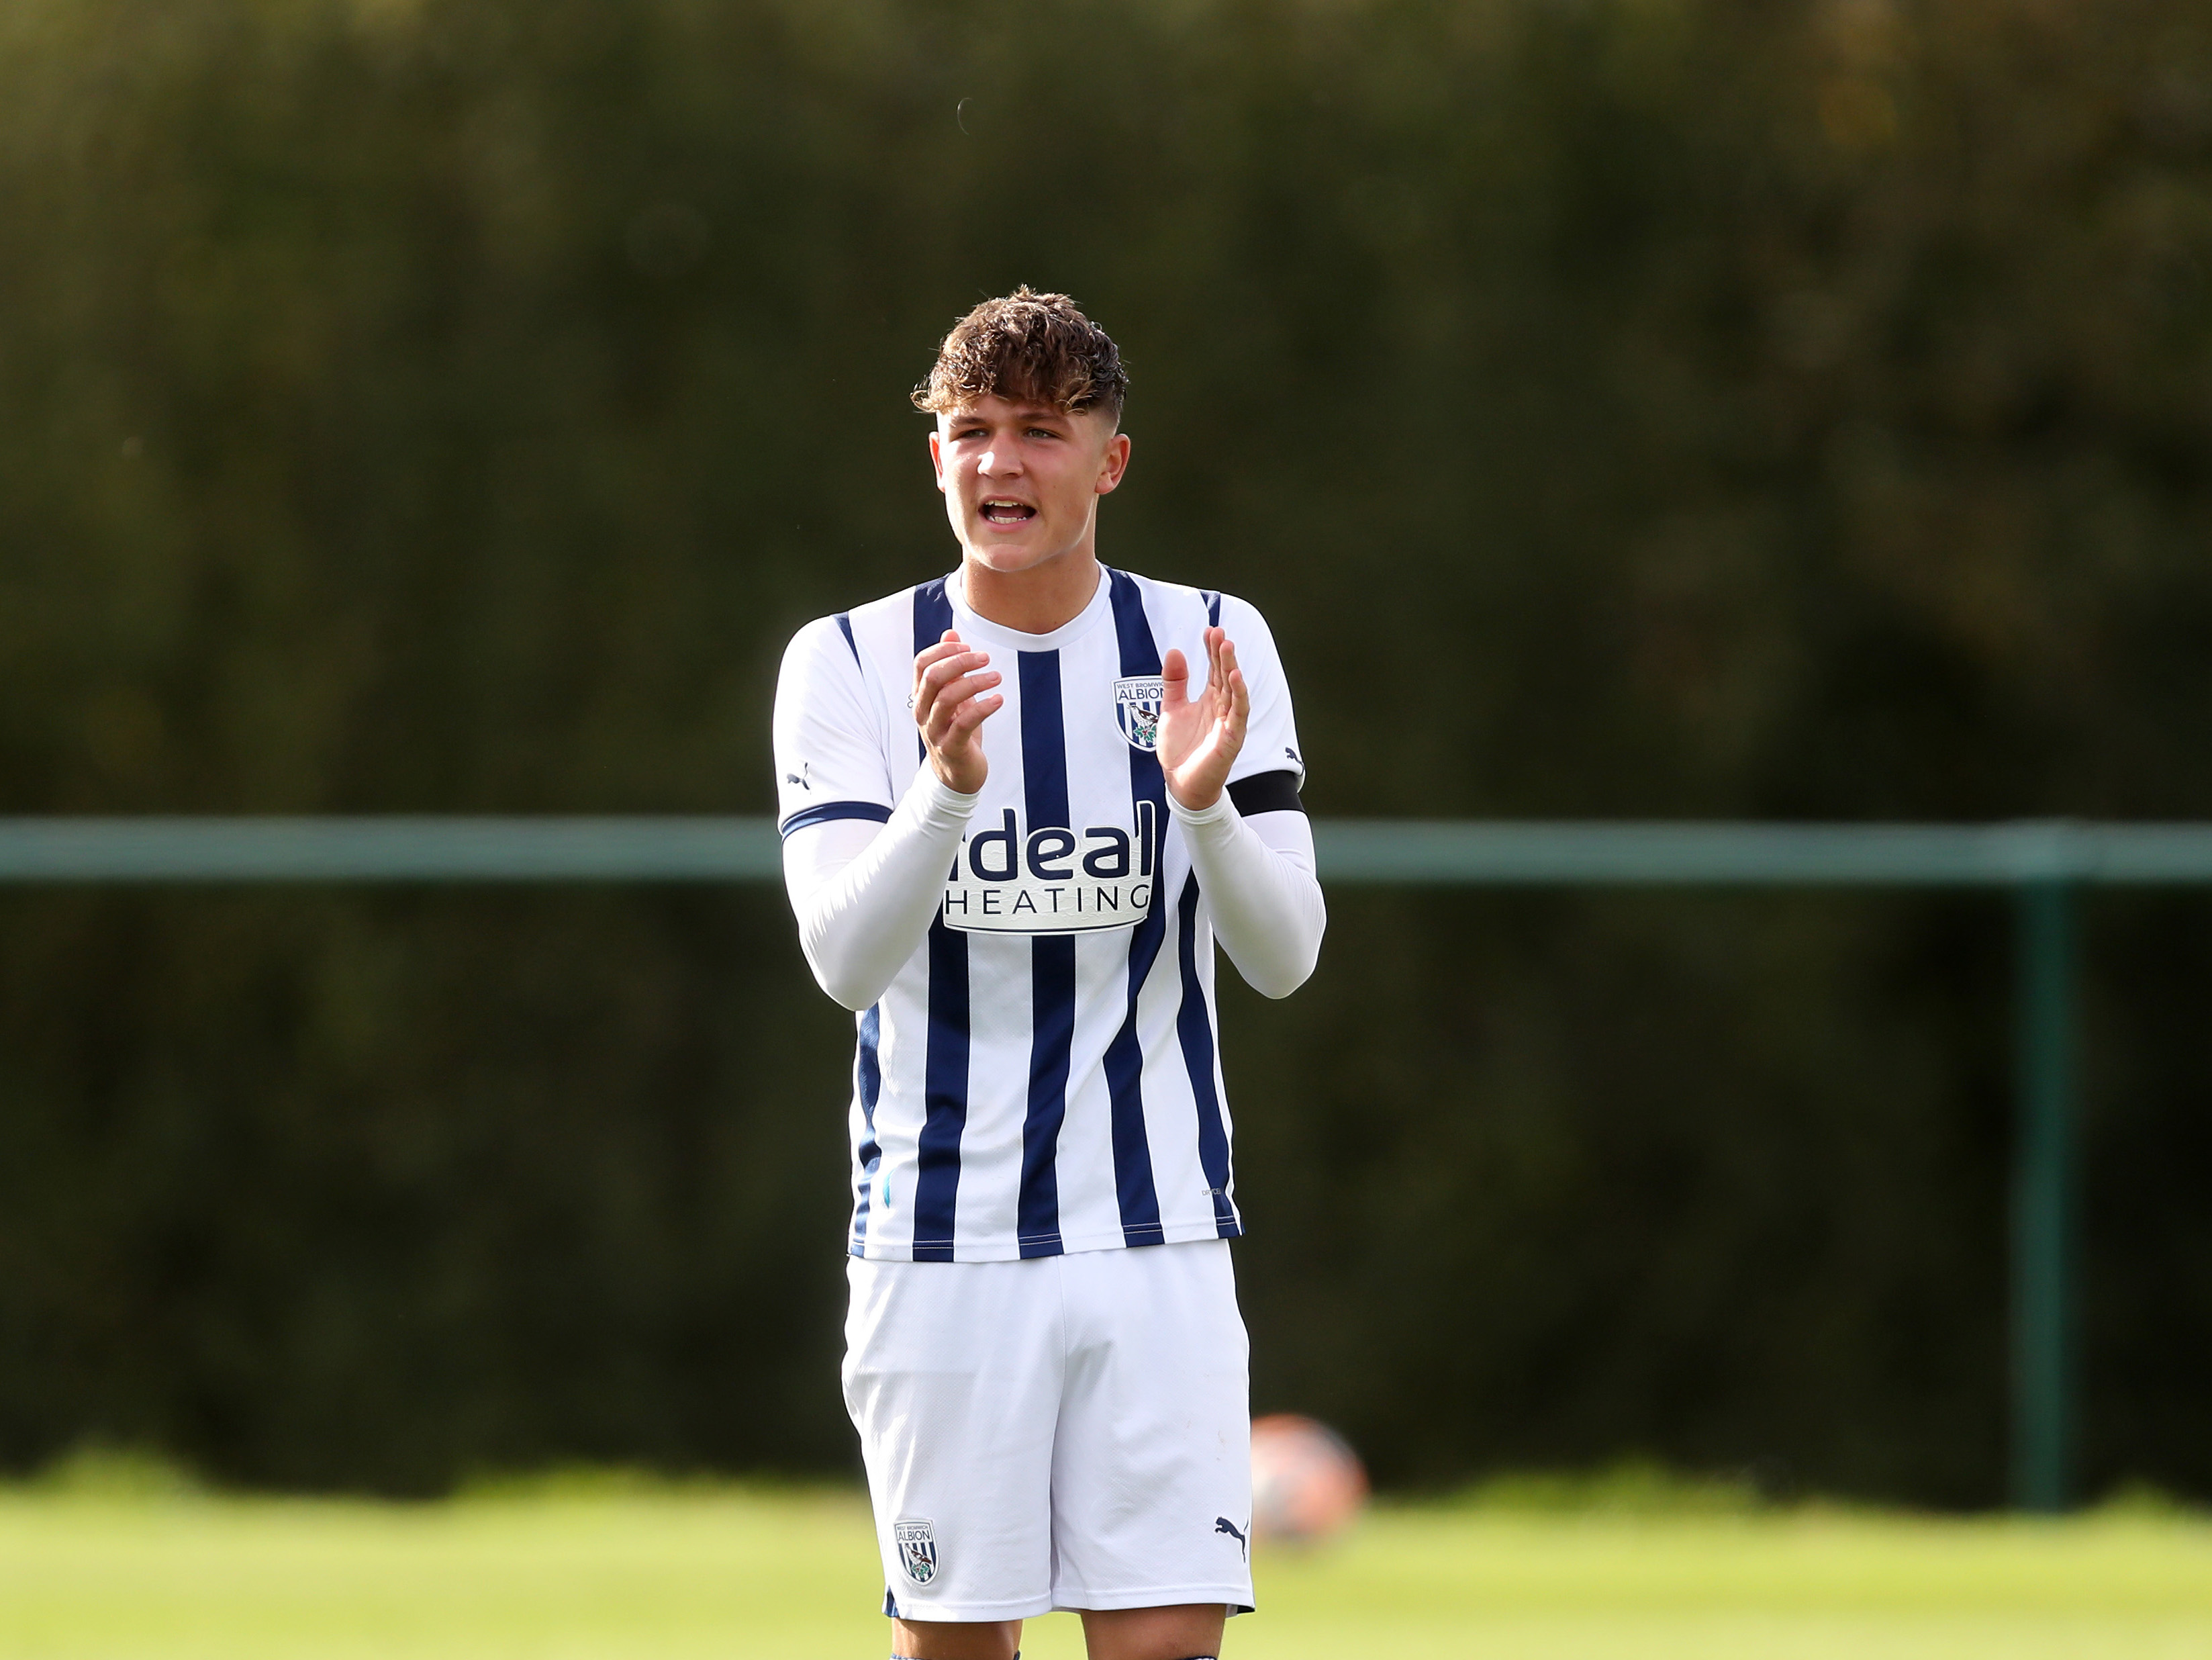 A photo of Albion U18 Cole Deeming encouraging his team-mates during their game v West Ham at the club's Walsall training ground